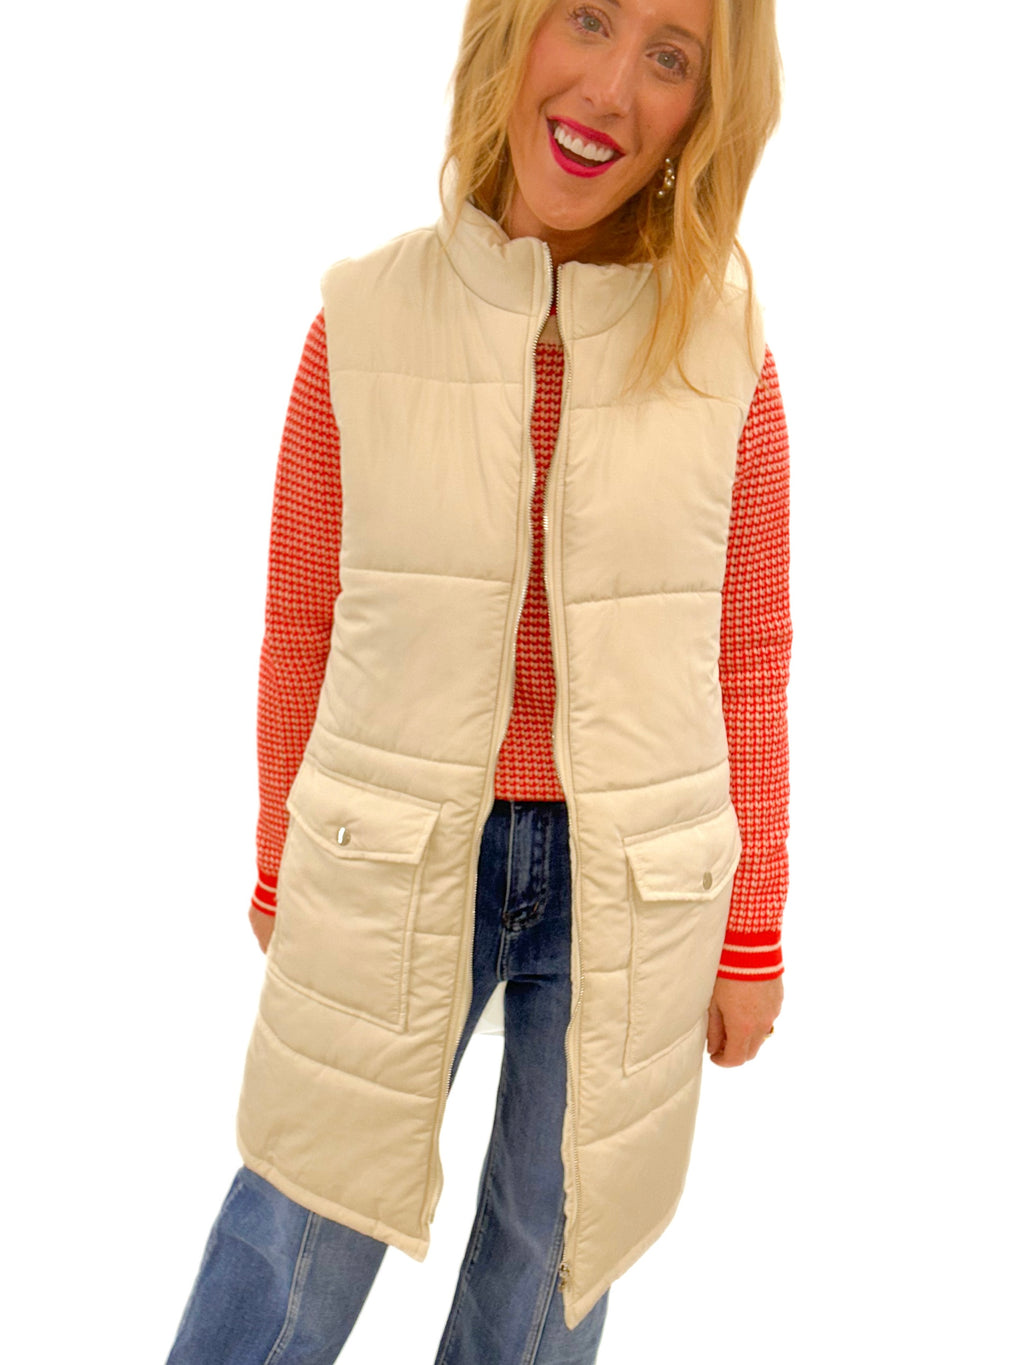 All About Puffy Vest